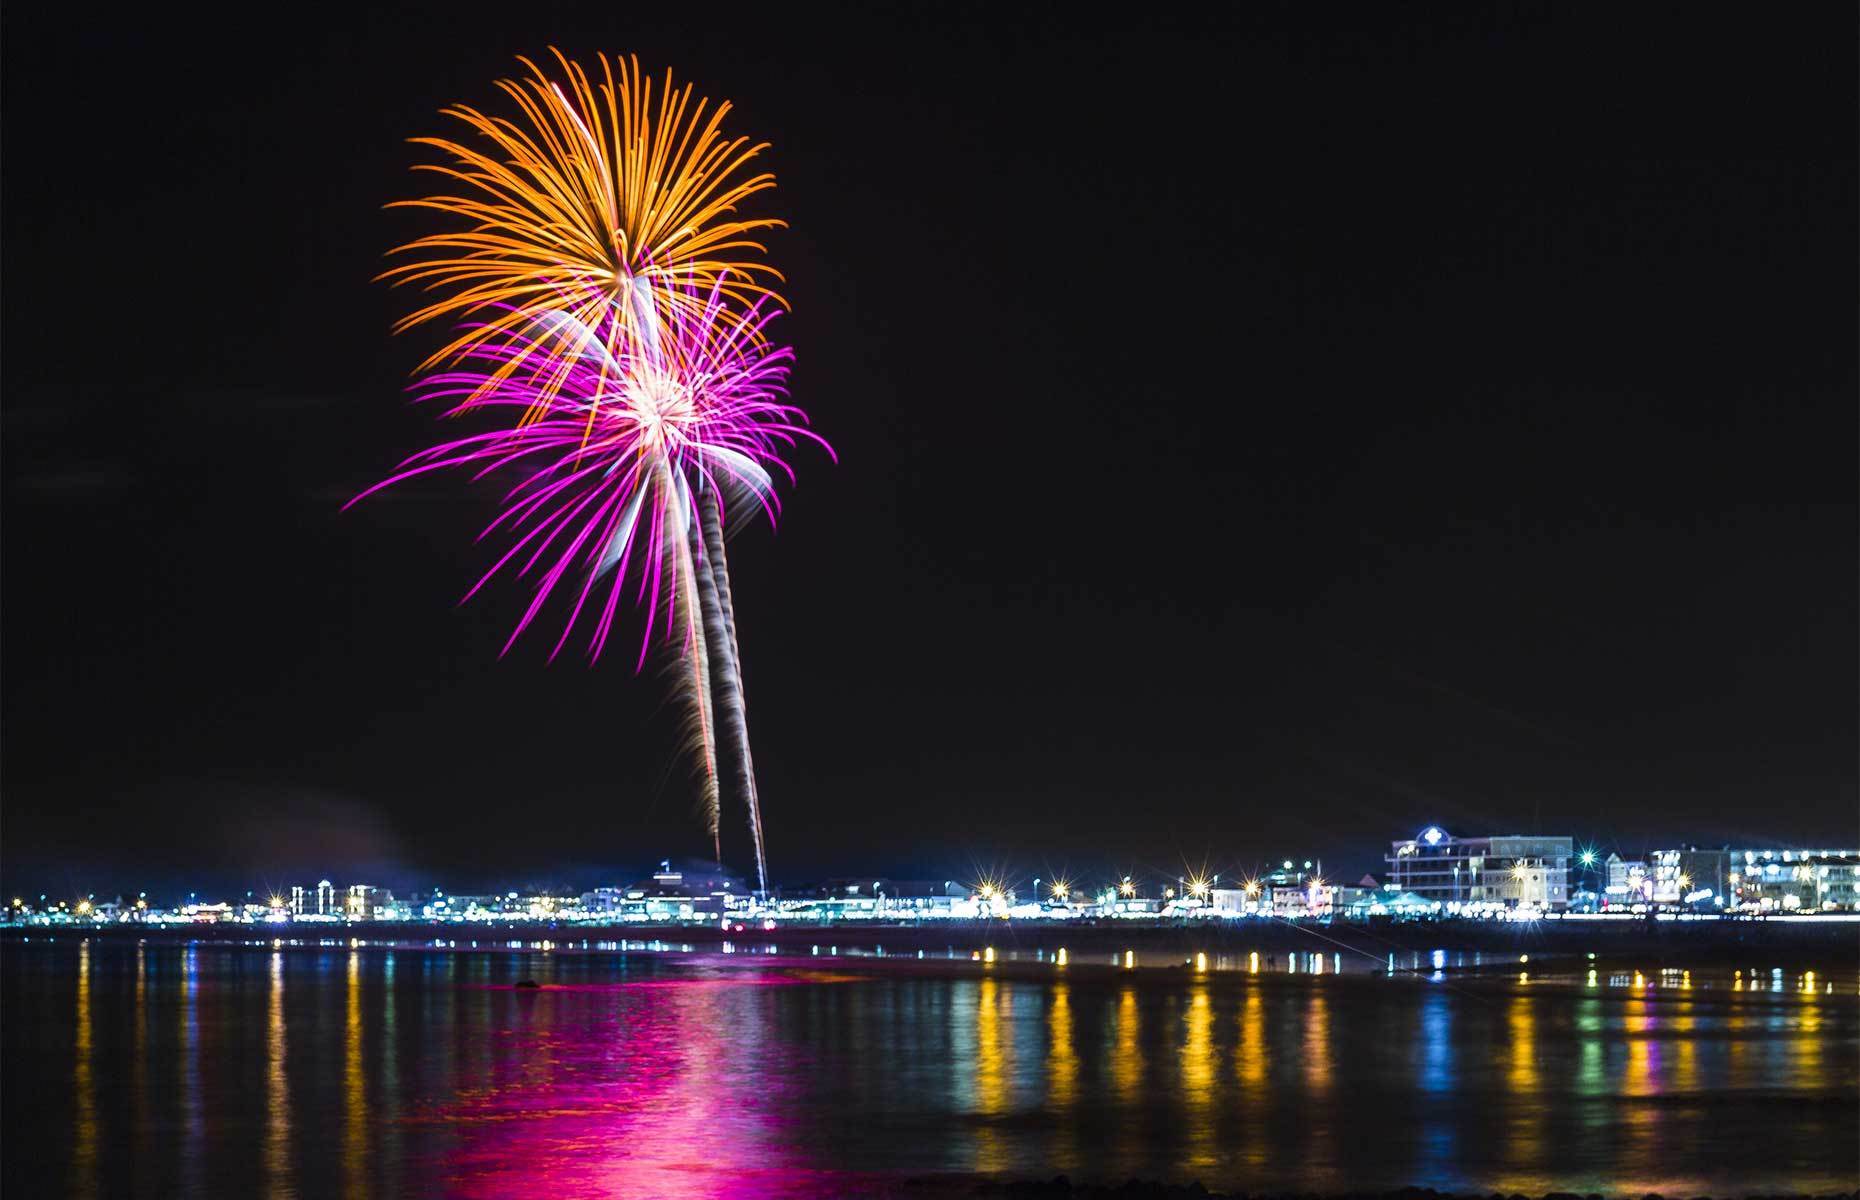 <p class="p1"><span>Hampton Beach is the ideal spot for seeing <a href="https://www.hamptonbeach.org/events/fireworks/" rel="noreferrer noopener"><span>fireworks throughout the year, namely on Wednesday evenings during the summer, July 4, and December 31</span></a>. Timing your visit to coincide with one of these dates is definitely worth the effort. Otherwise, enjoy the extensive shoreline and many other beach events.</span></p>